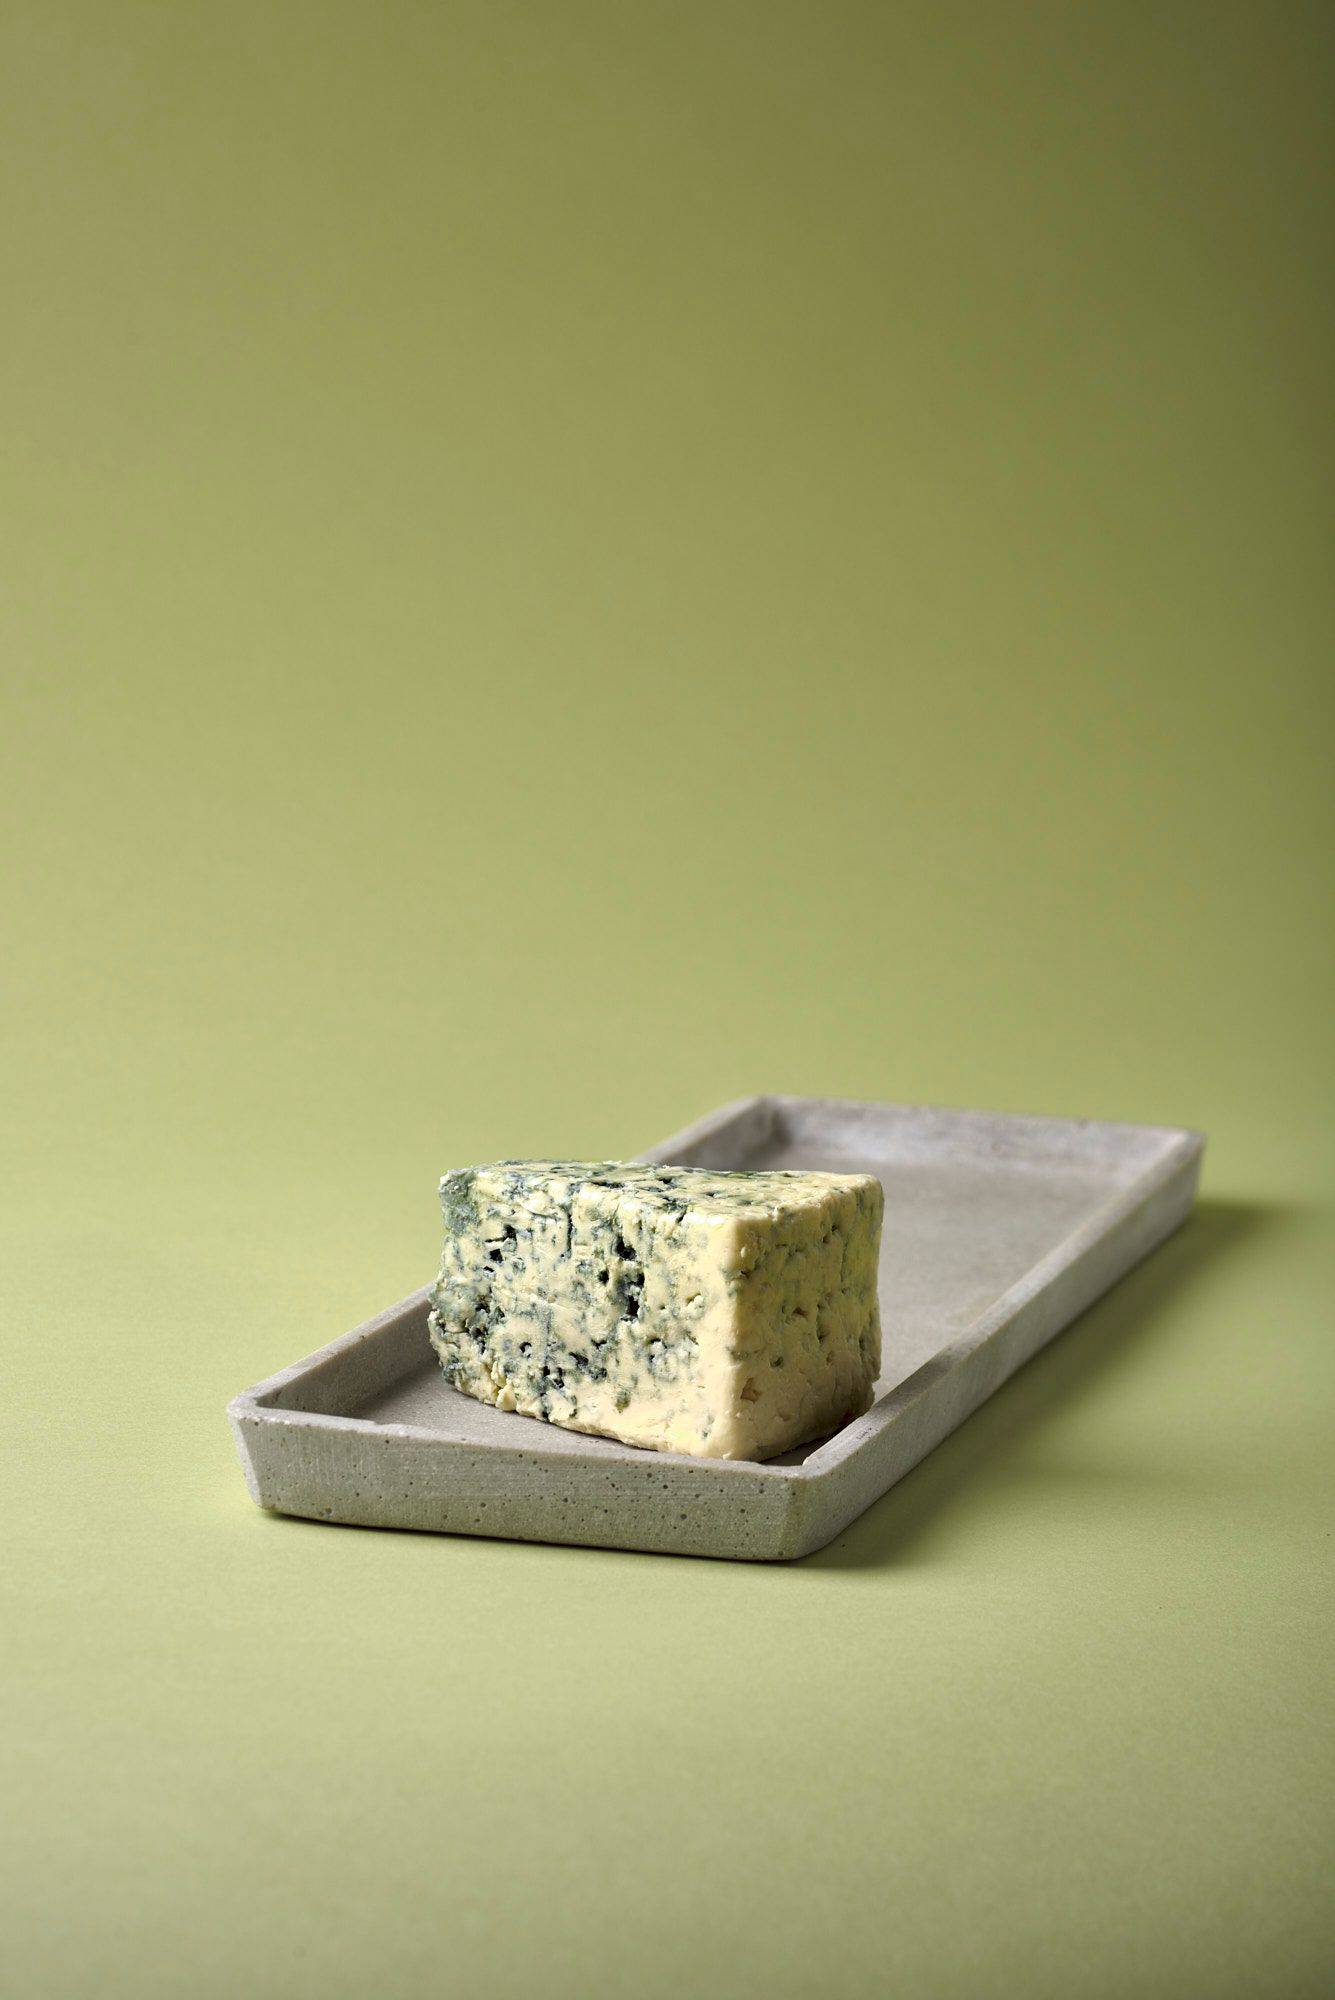 blue cheese on a concrete plate with green background